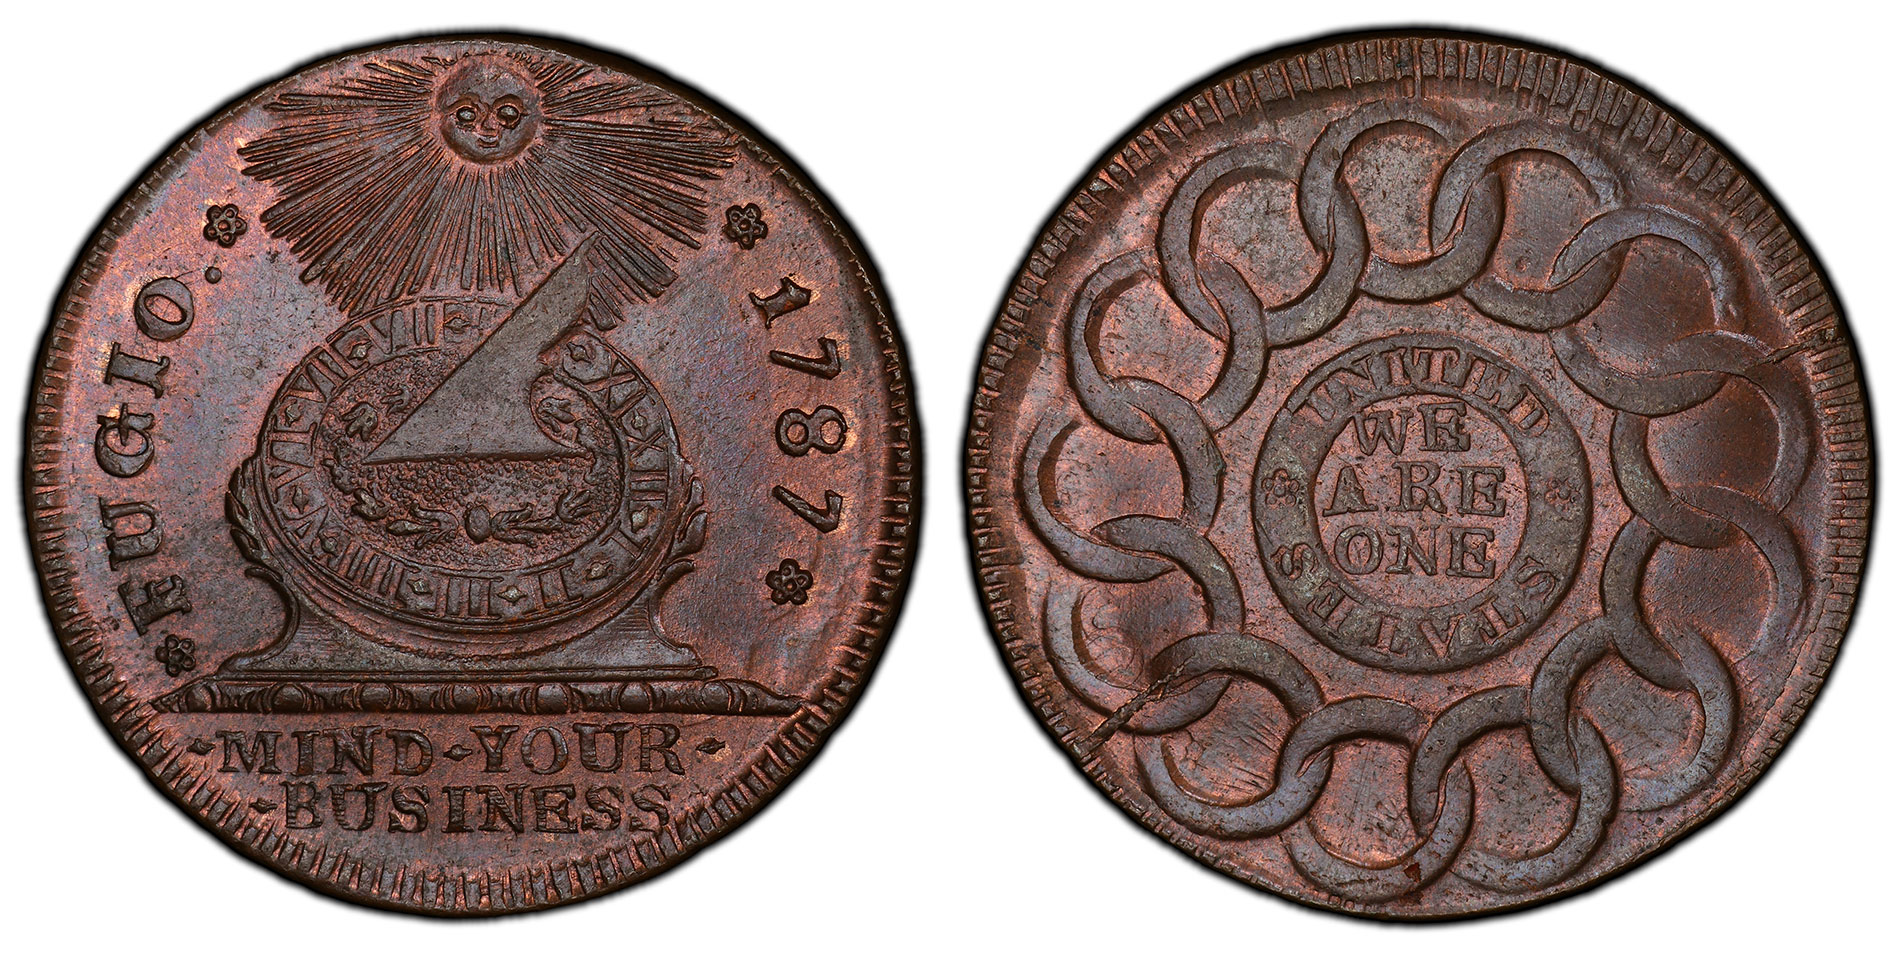 Fugio Cents: The First Regular-Issue United States Coin